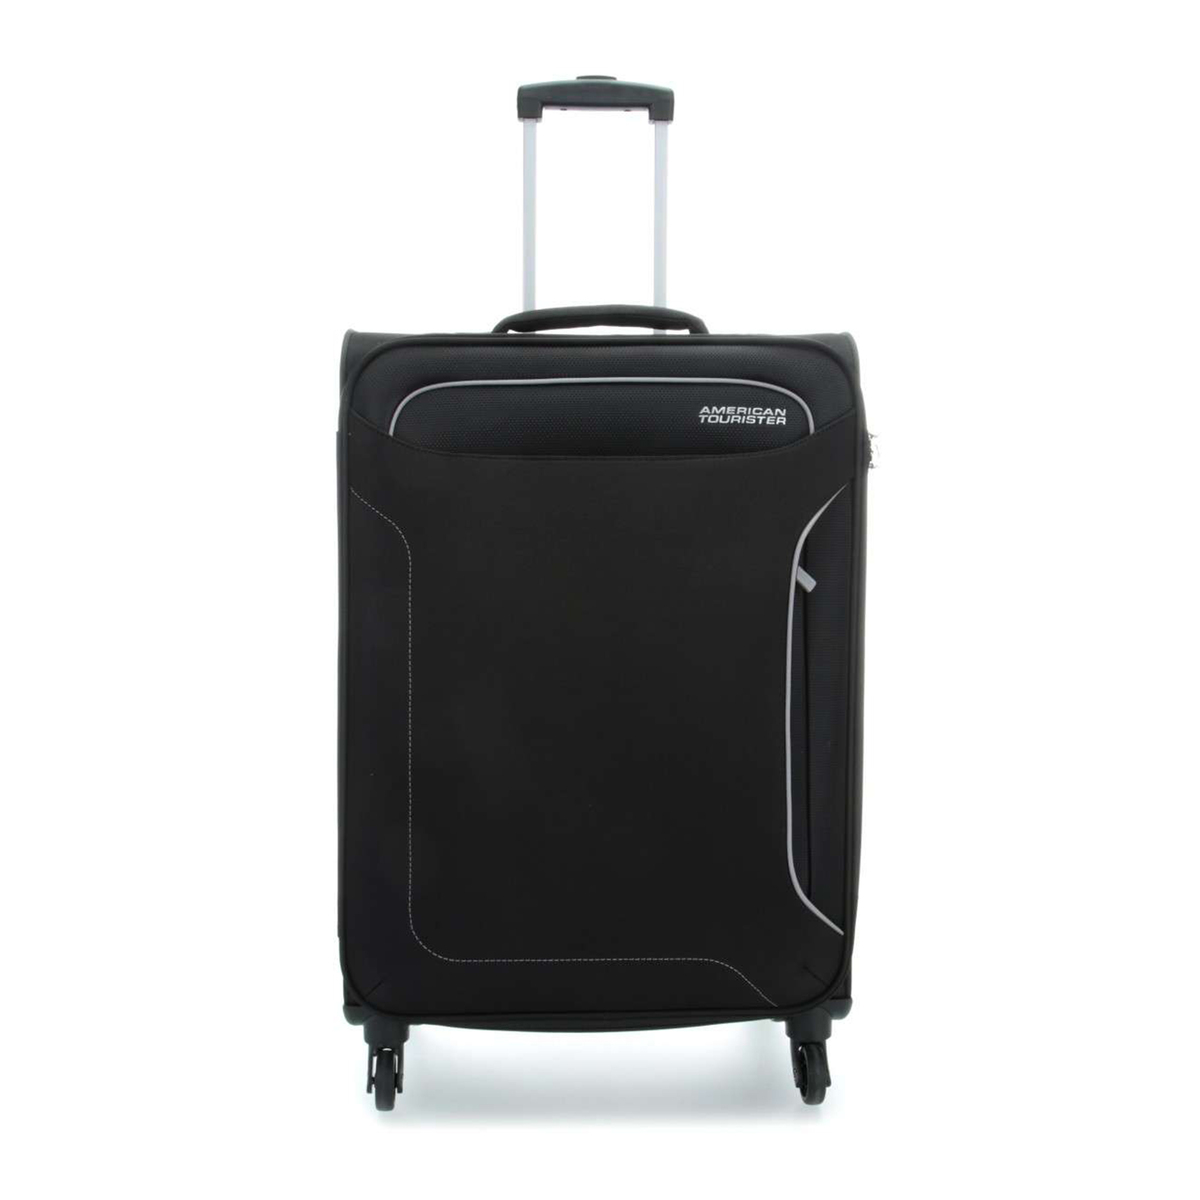 American Tourister Holiday 4 Wheel Soft Trolley, 55 cm, Black